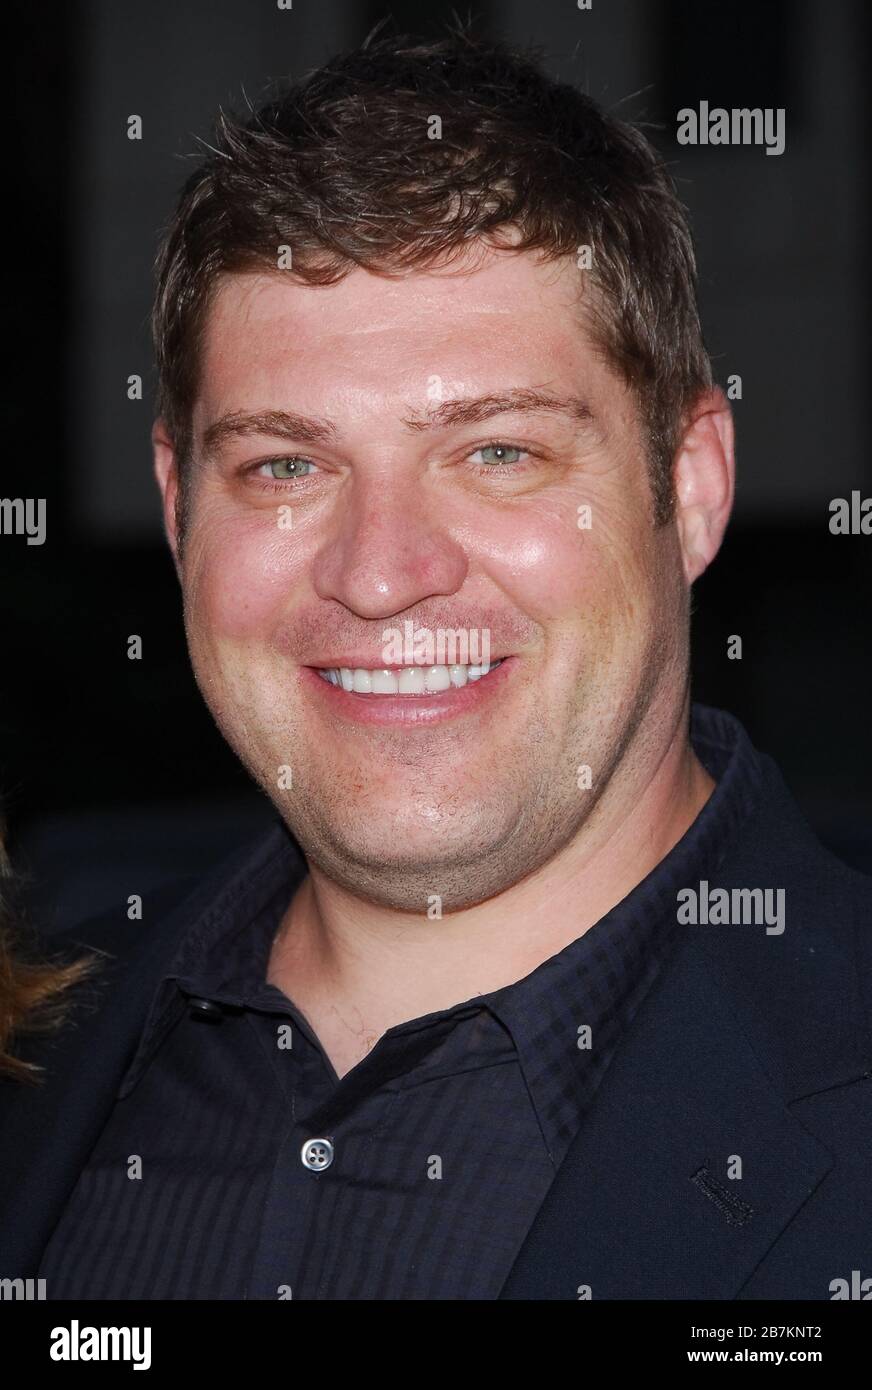 Brad William Henke at the Los Angeles Premiere of "Hollywoodland" held at the Academy of Motion Picture Arts and Sciences in Beverly Hills, CA. The event took place on Thursday, September 7, 2006.  Photo by: SBM / PictureLux - File Reference # 33984-6906SBMPLX Stock Photo